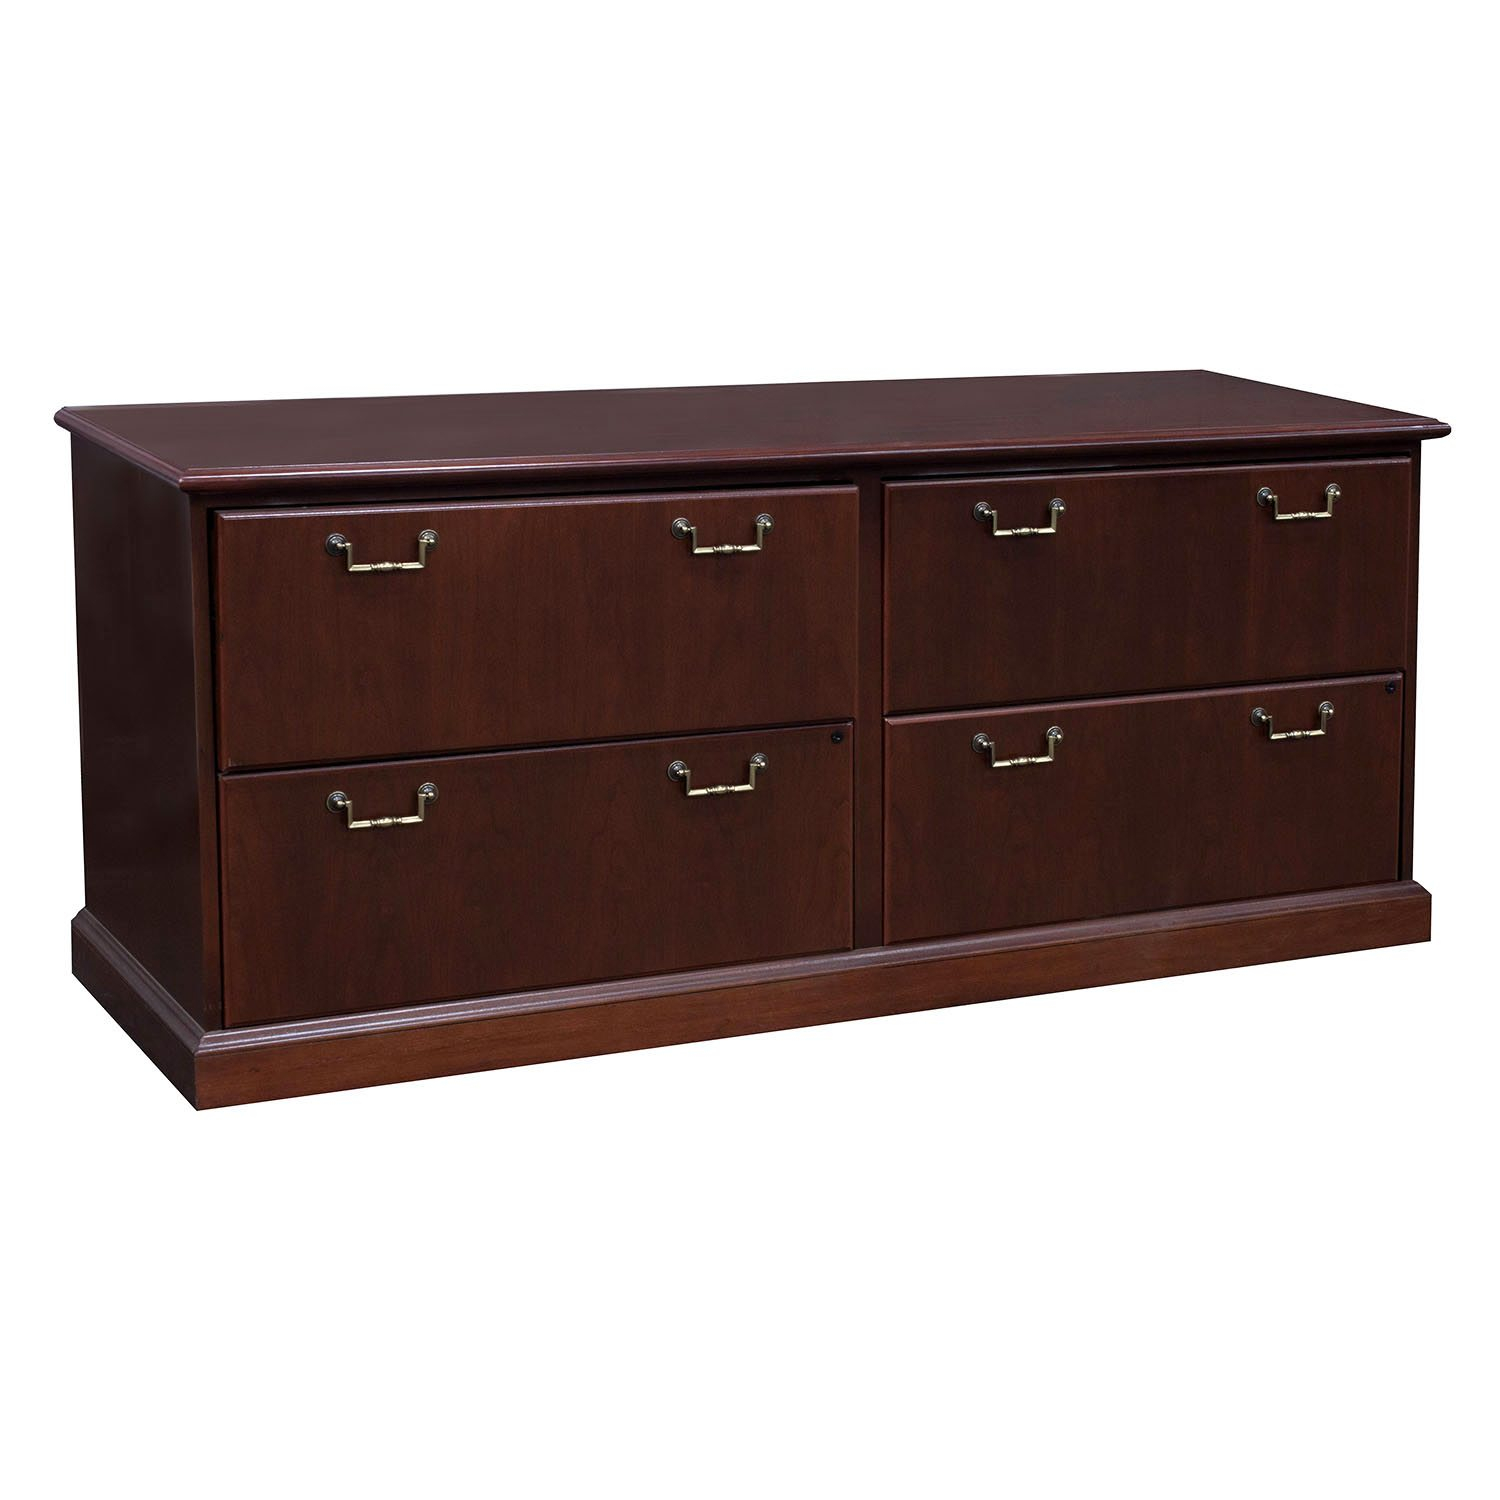 Traditional 4 Drawer Wood Credenza Cherry National Single File Cabinet regarding proportions 1500 X 1500